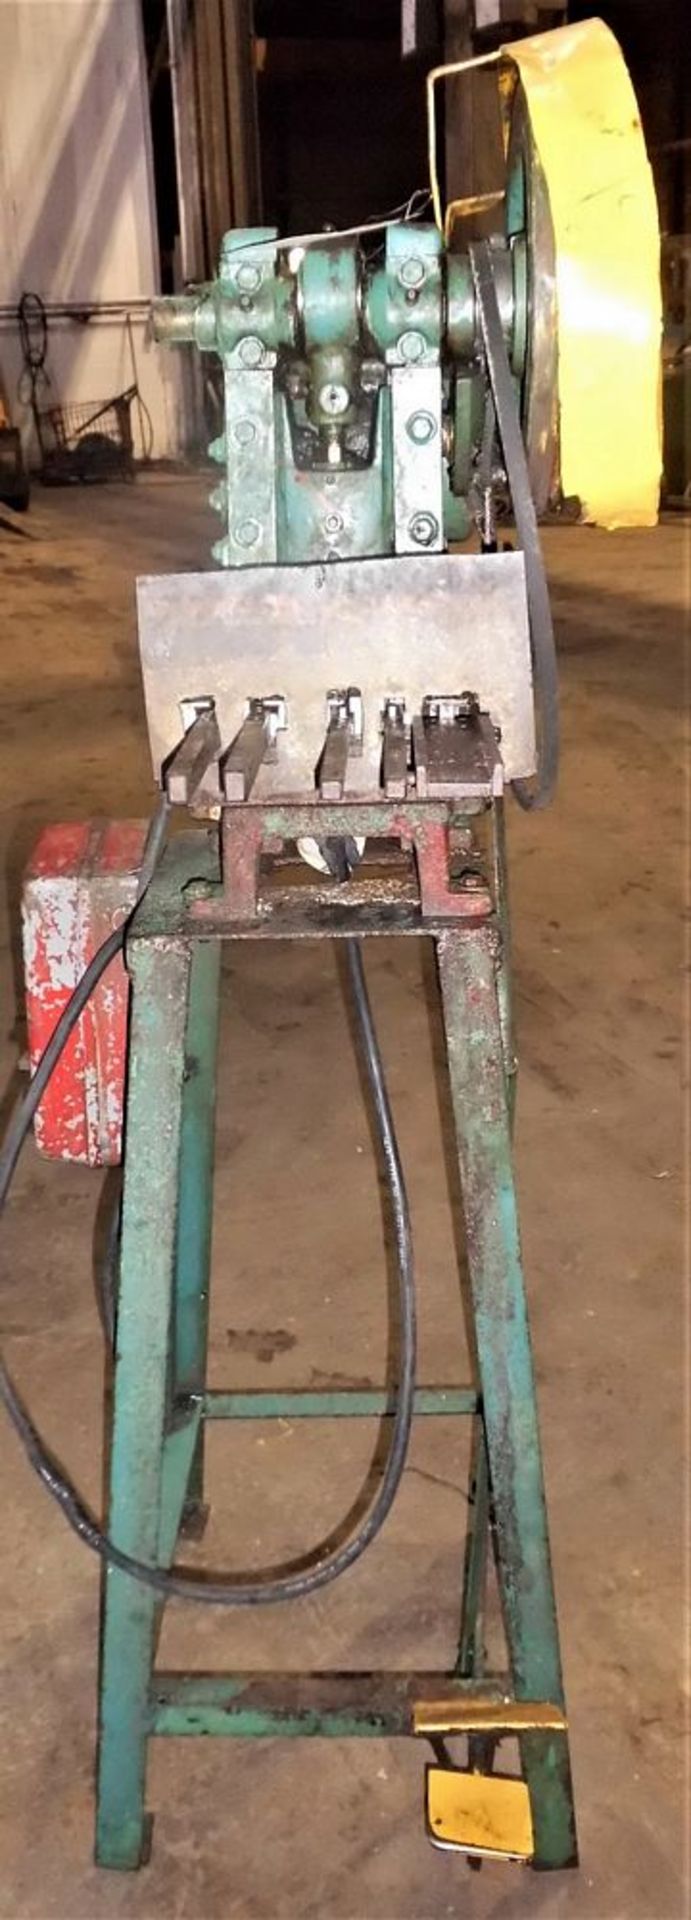 Benchmaster OBI Punch Press 5 Ton x 10'' x 6 1/4''. LOADING FEE FOR THIS LOT: $100